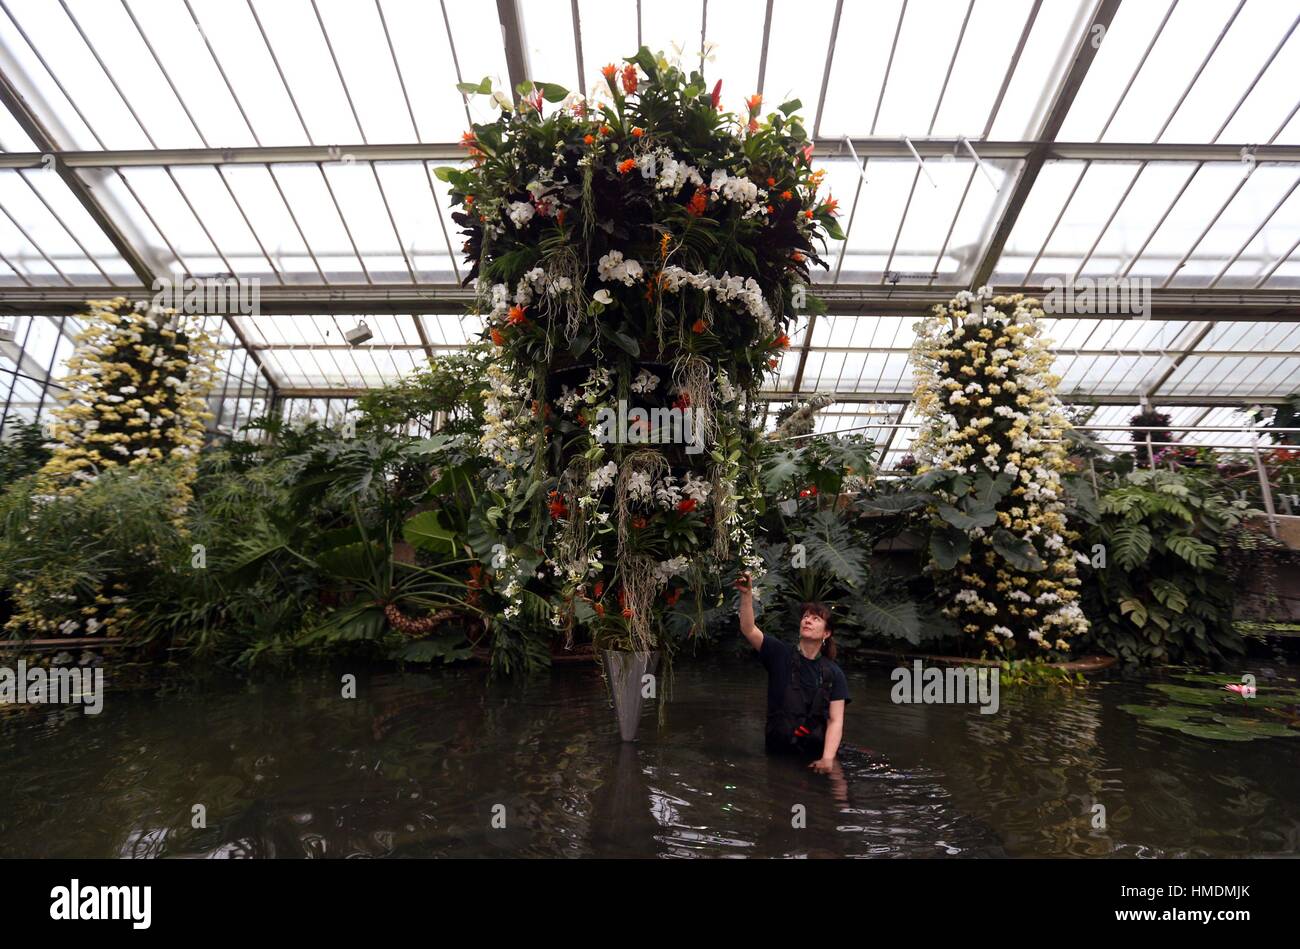 Horticulturalist Joanna Bates puts the finishing touches to a Samara Wheel display at the Kew Orchid festival in the Prince of Wales Conservatory at Kew Gardens in west London. Stock Photo